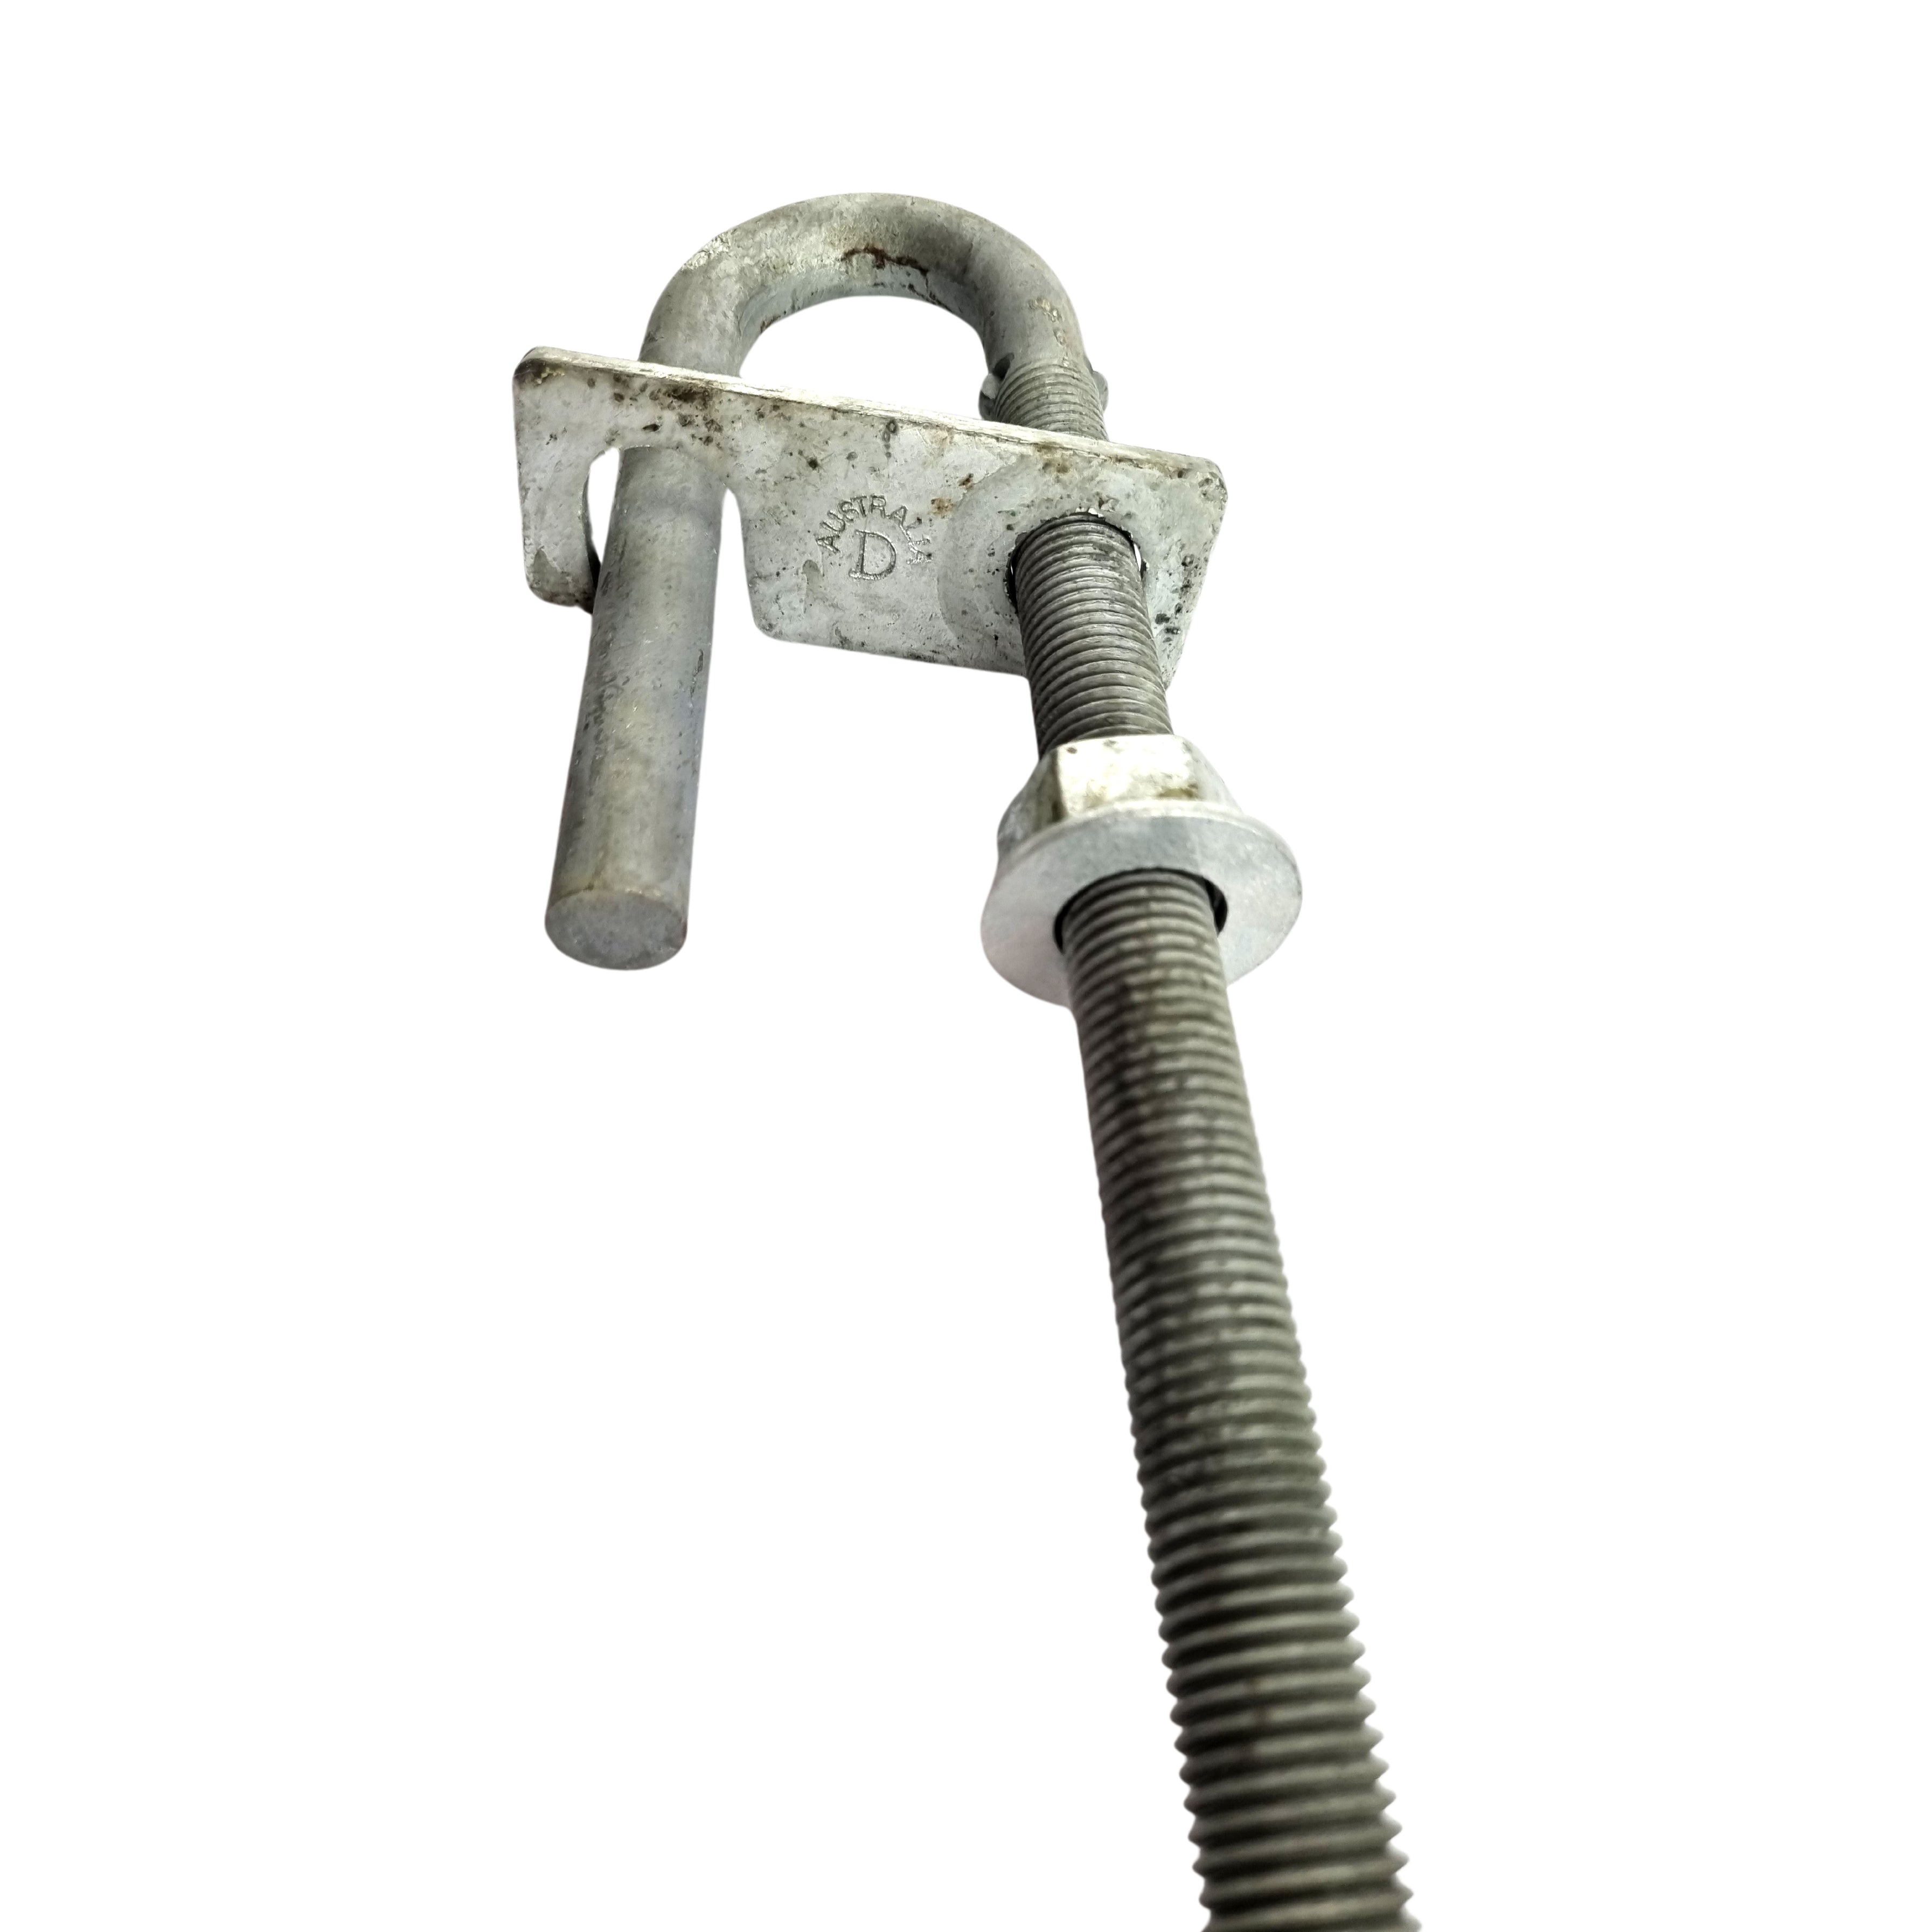 Timber Post Strap - Bolt Thru - Type C - Galvanised. Australian Made. Fence & Gate Fittings. Shop online chain.com.au. Australia wide shipping.